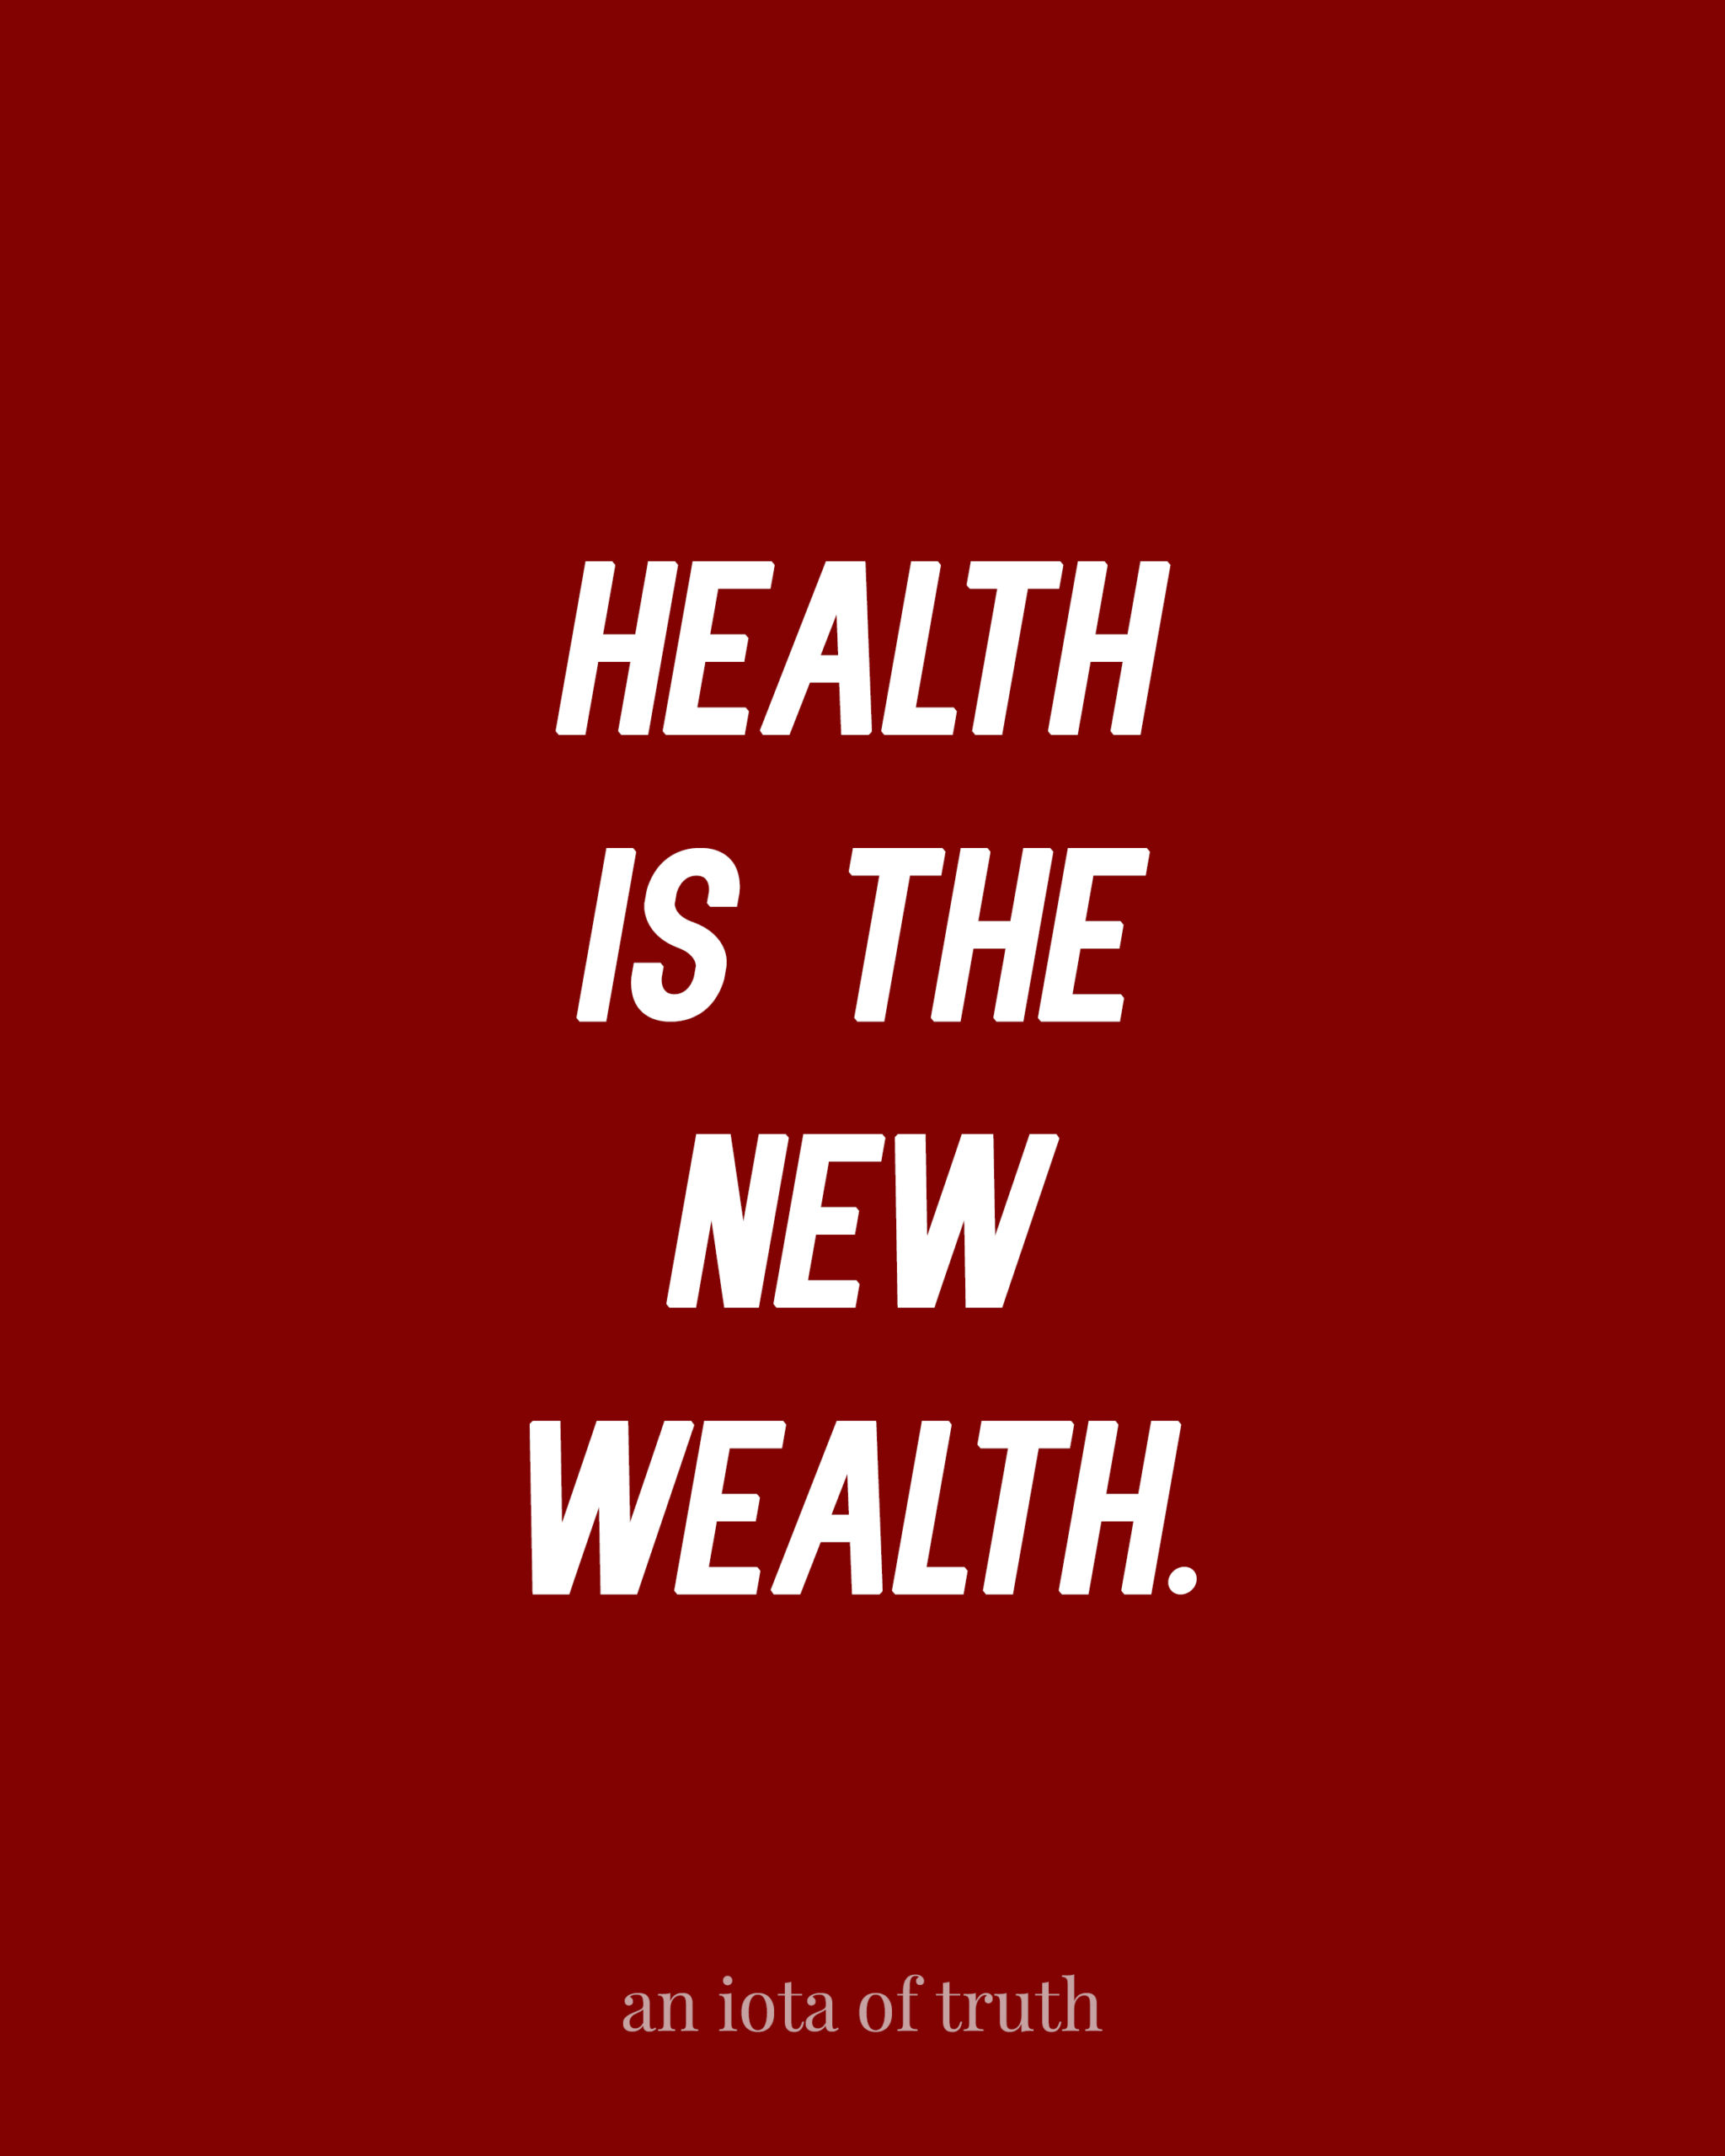 Health is the New Wealth.